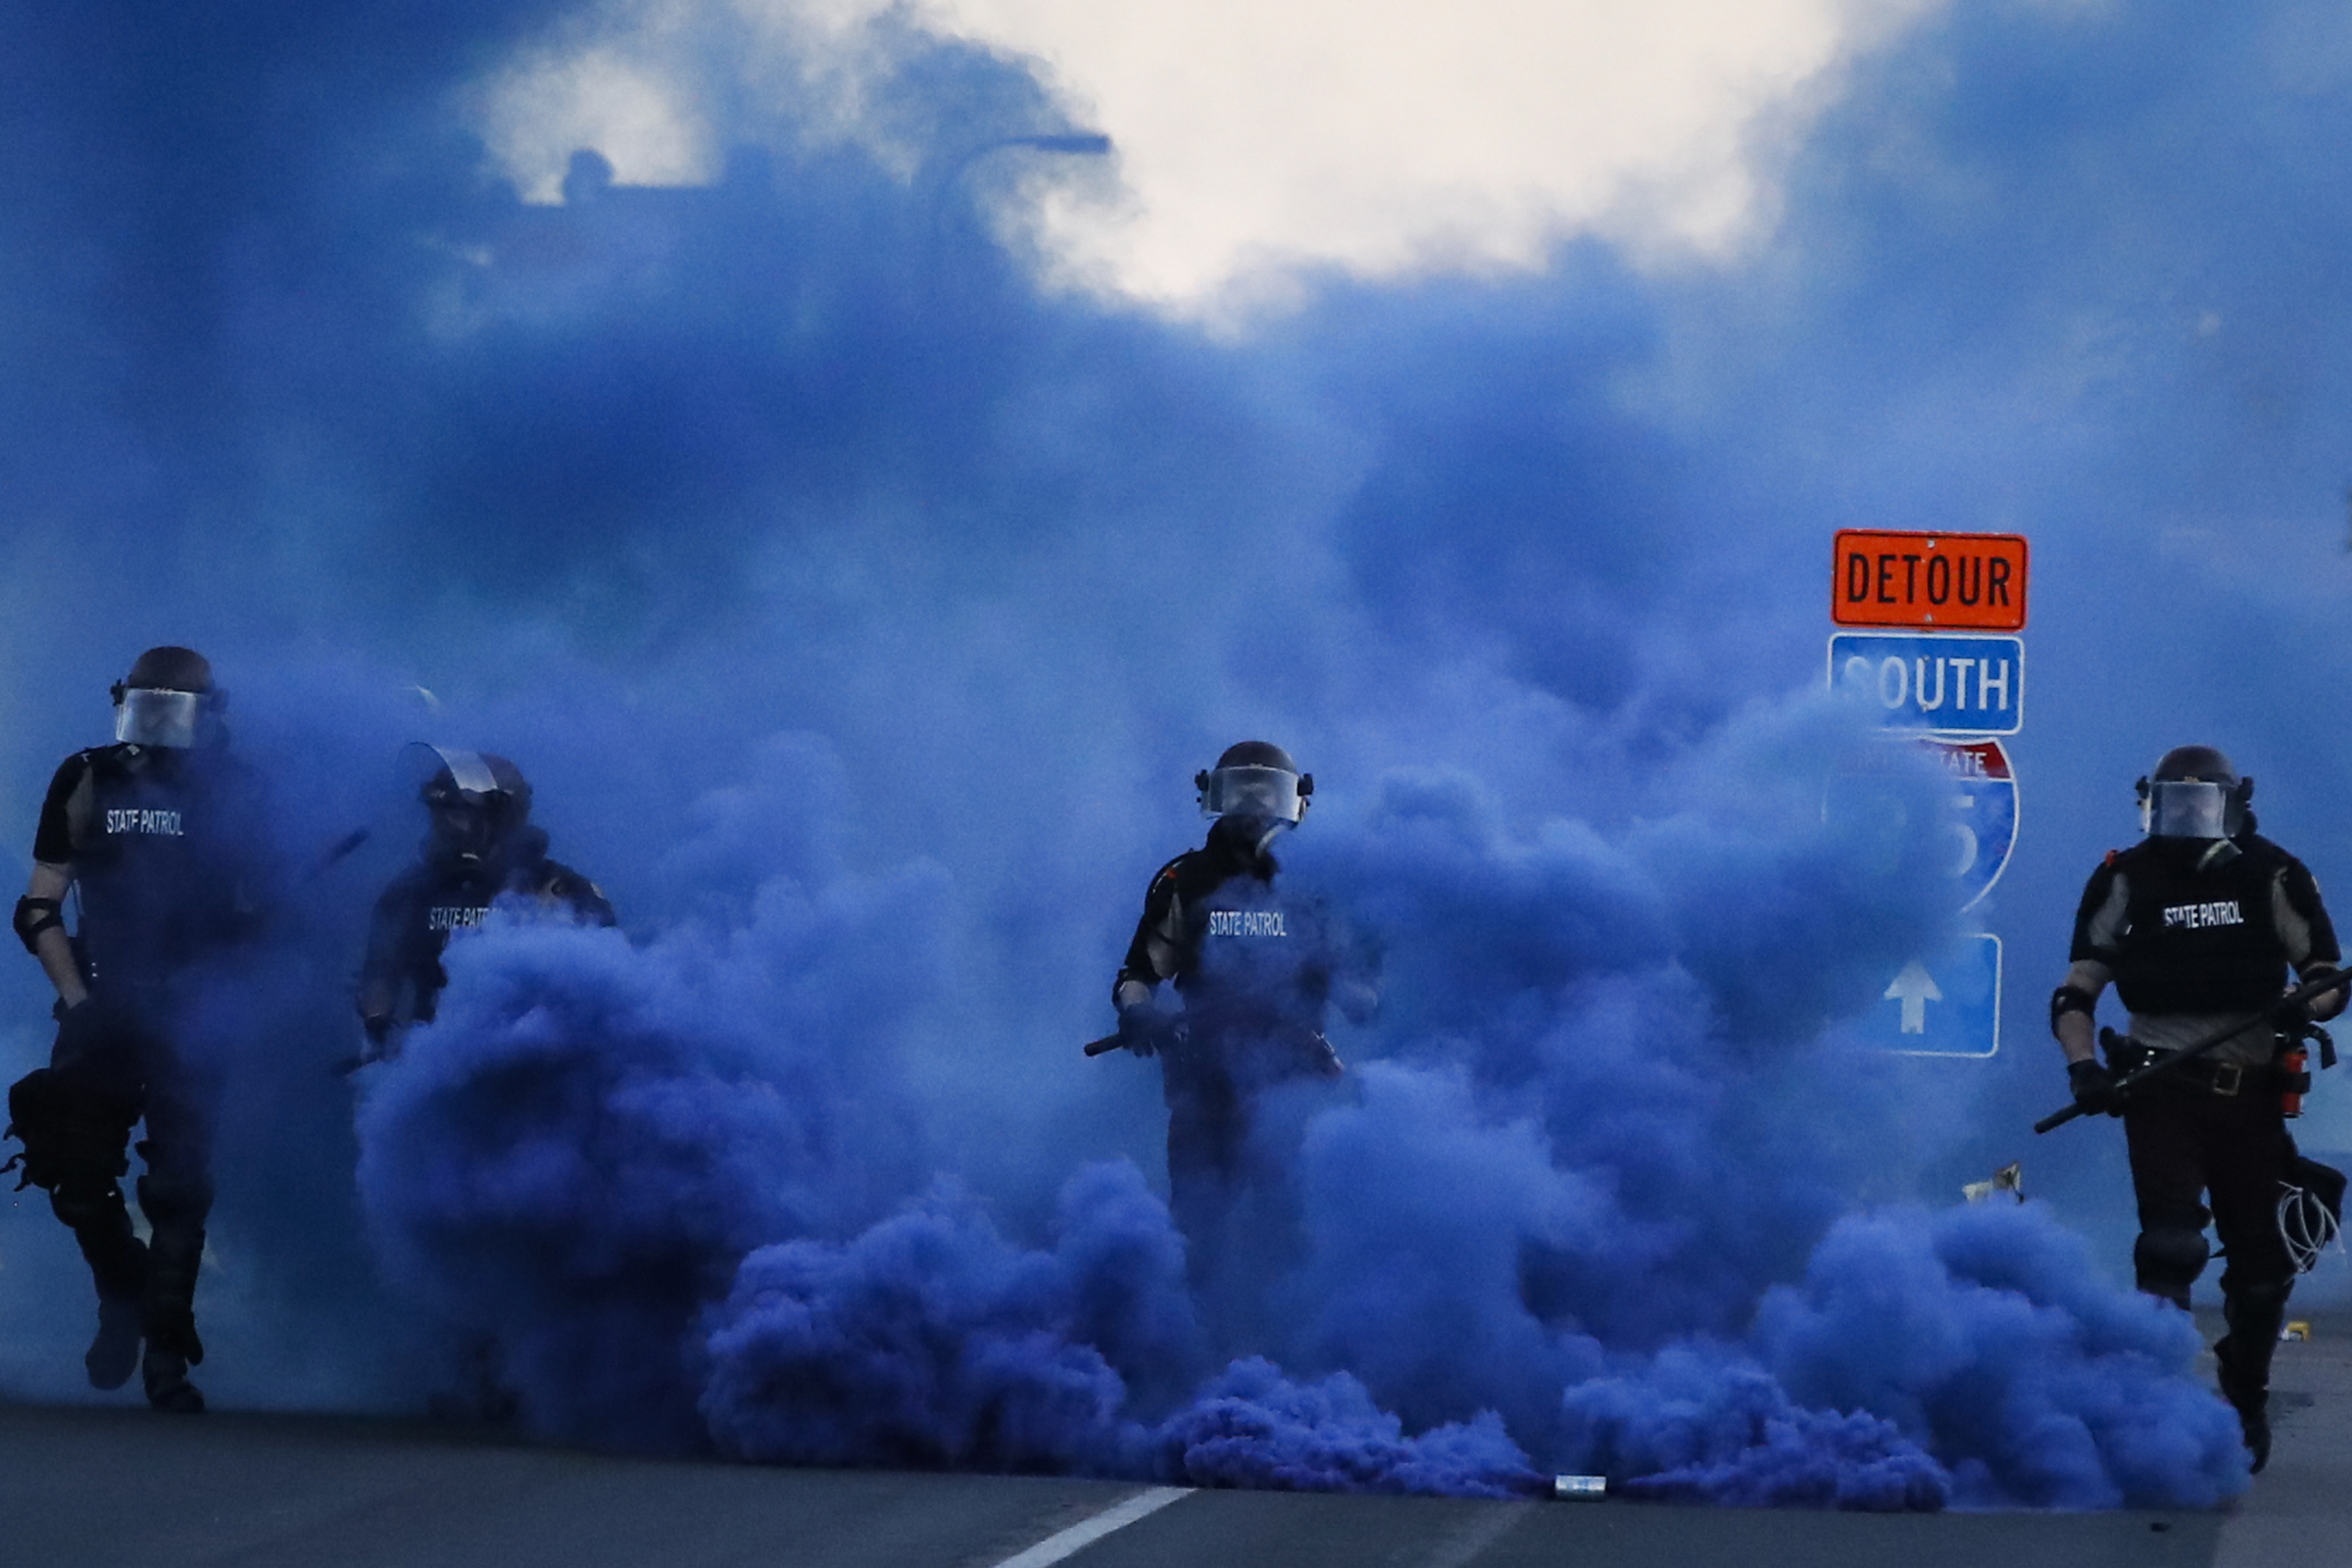 Police in riot gear walk through a cloud of blue smoke as they advance on protesters near the Minneapolis 5th Precinct, on May 30, 2020. (John Minchillo—AP)